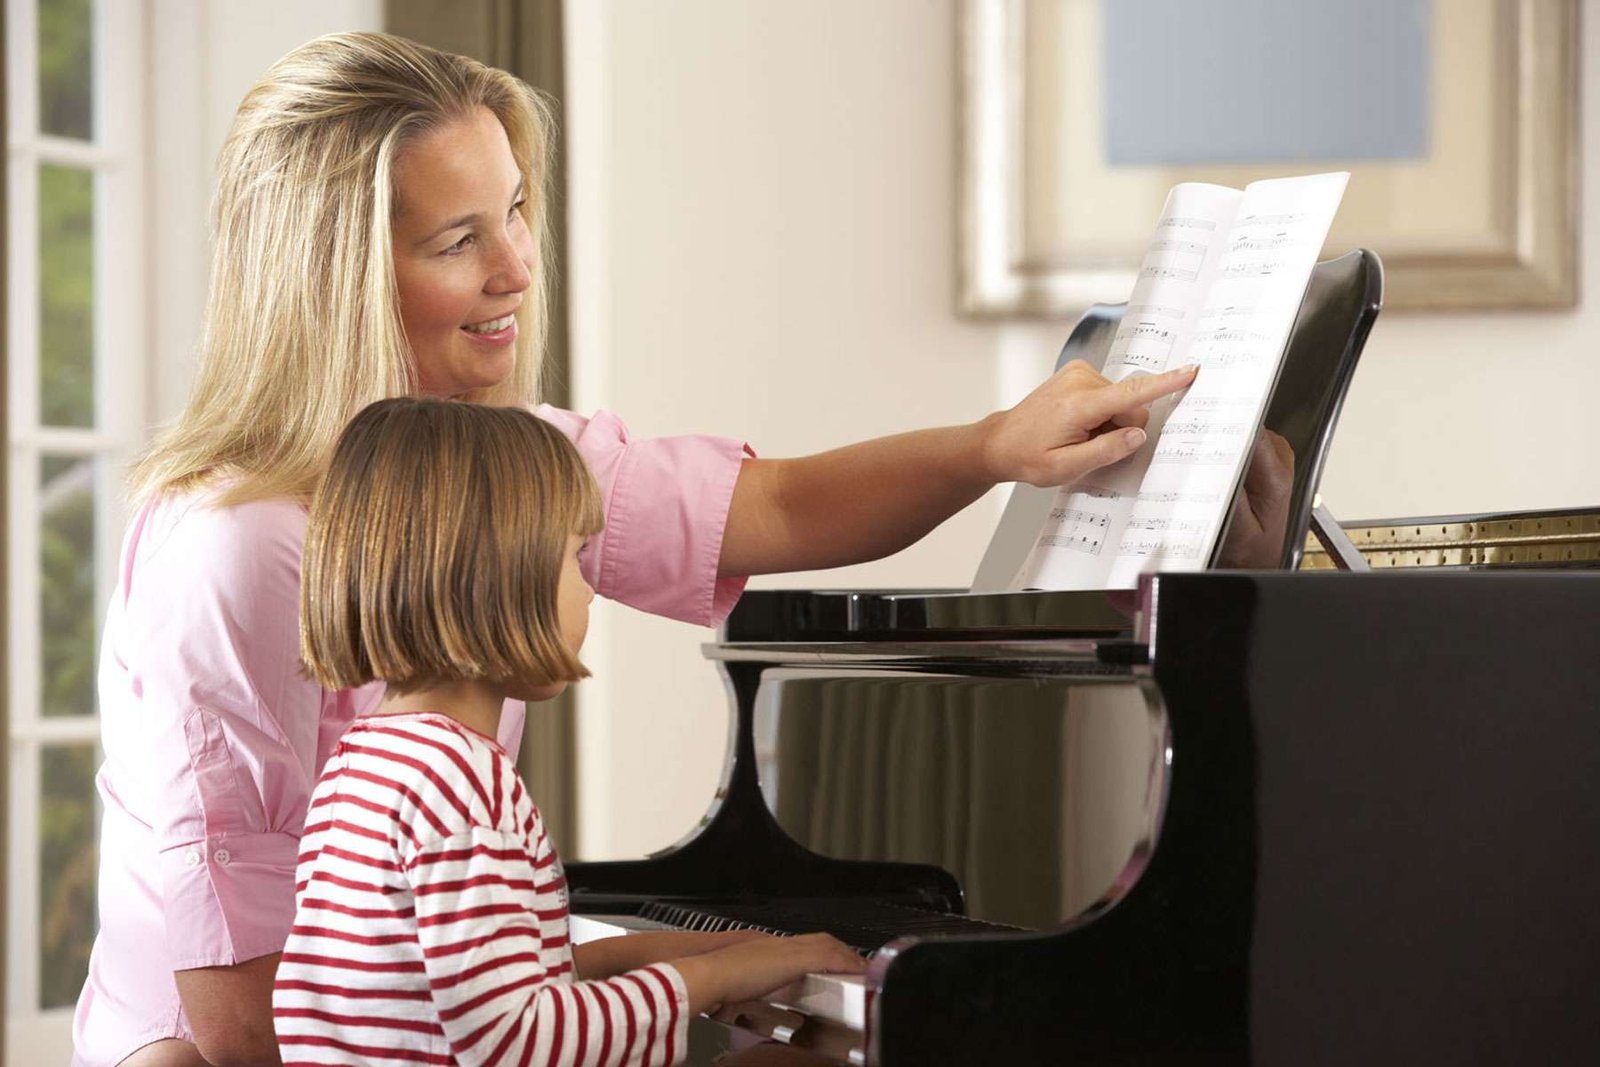 A piano tutor teaching a kid how to play a note